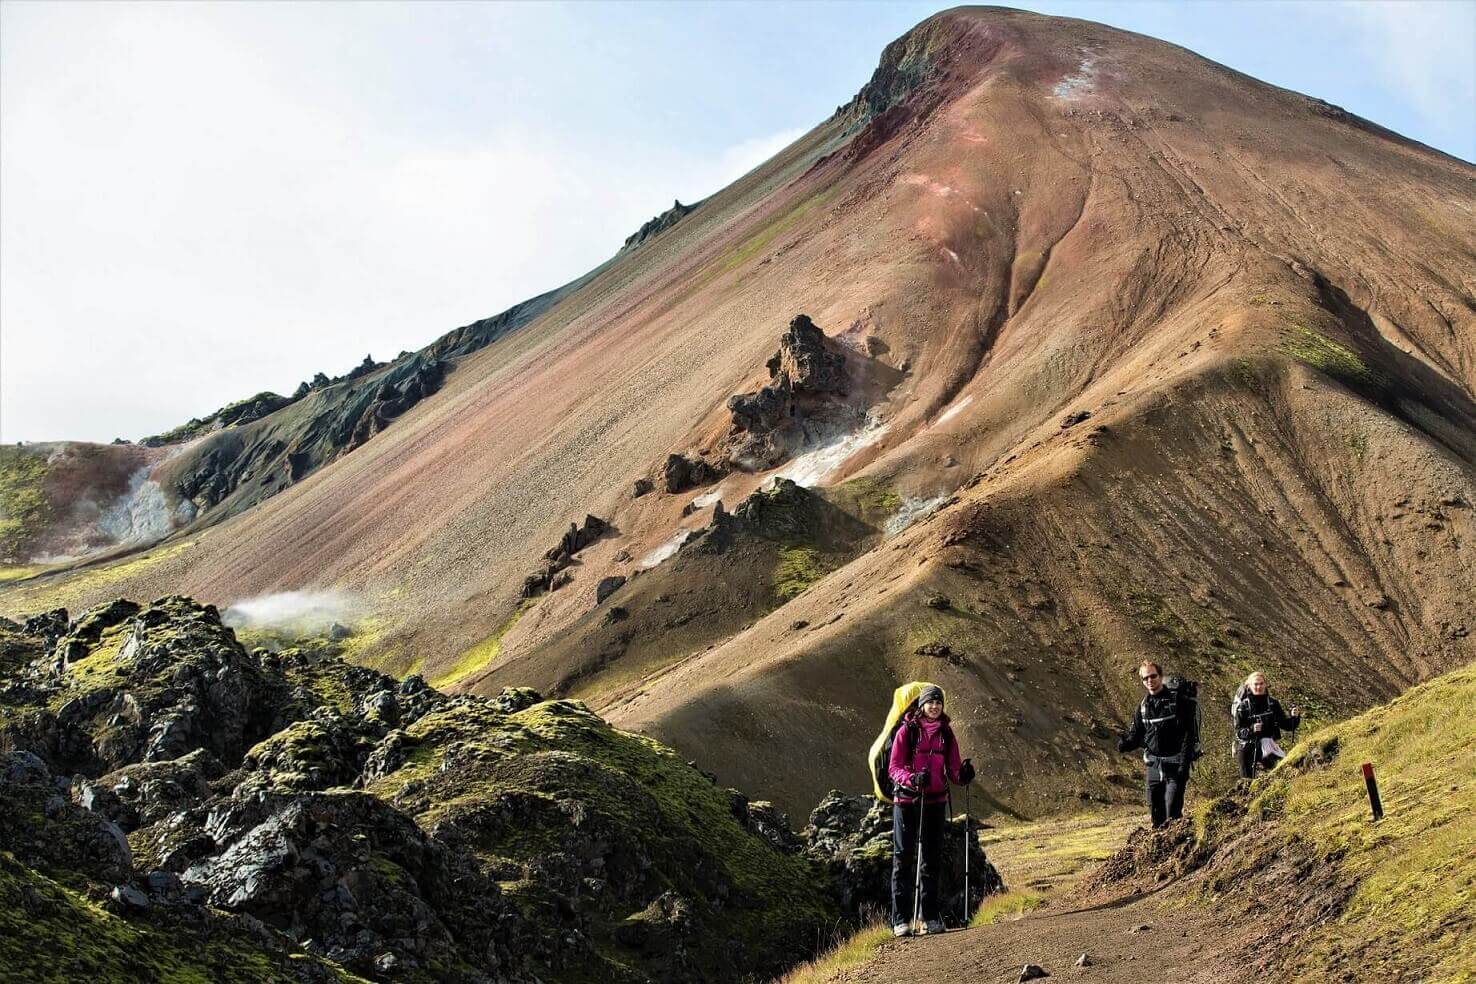 A 3-day hike in Landmannalaugar is one of the most incredible hikes in the world. 